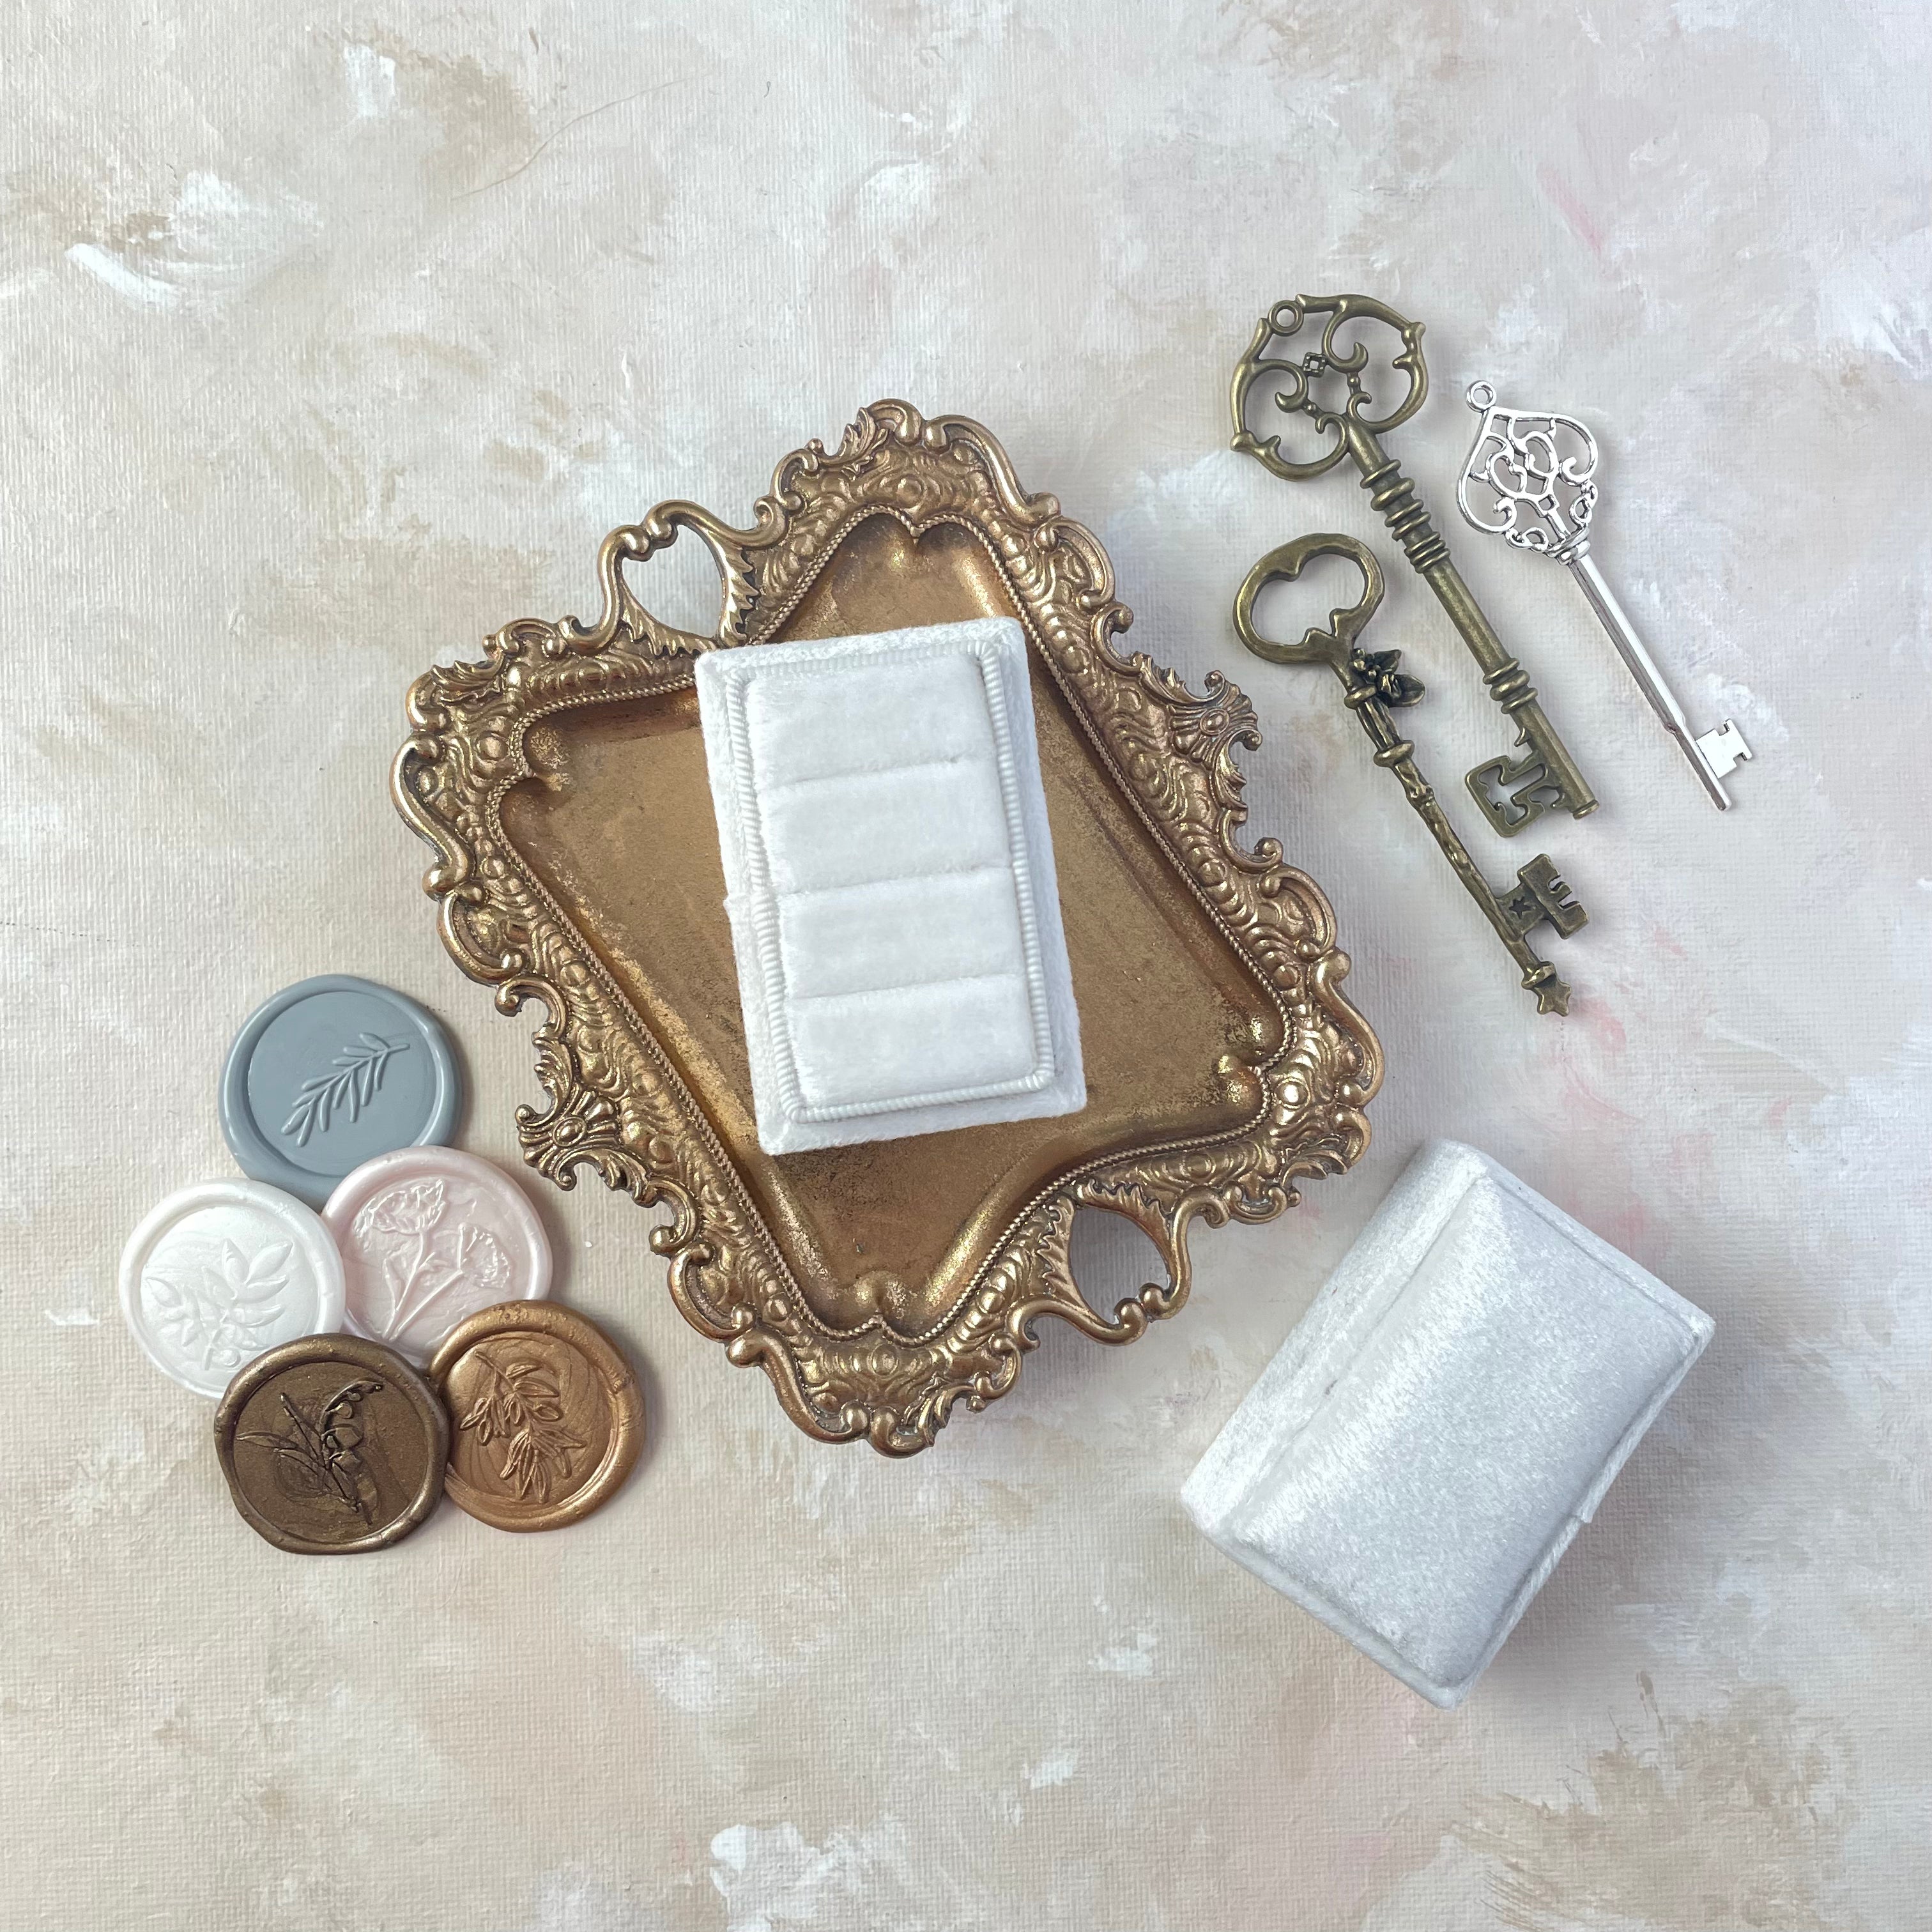 5 Classic neutral color pallet Wax Seals beside white 3 slot ring box on gold tray and three vintage keys - wedding flat lay props from Champagne & GRIT